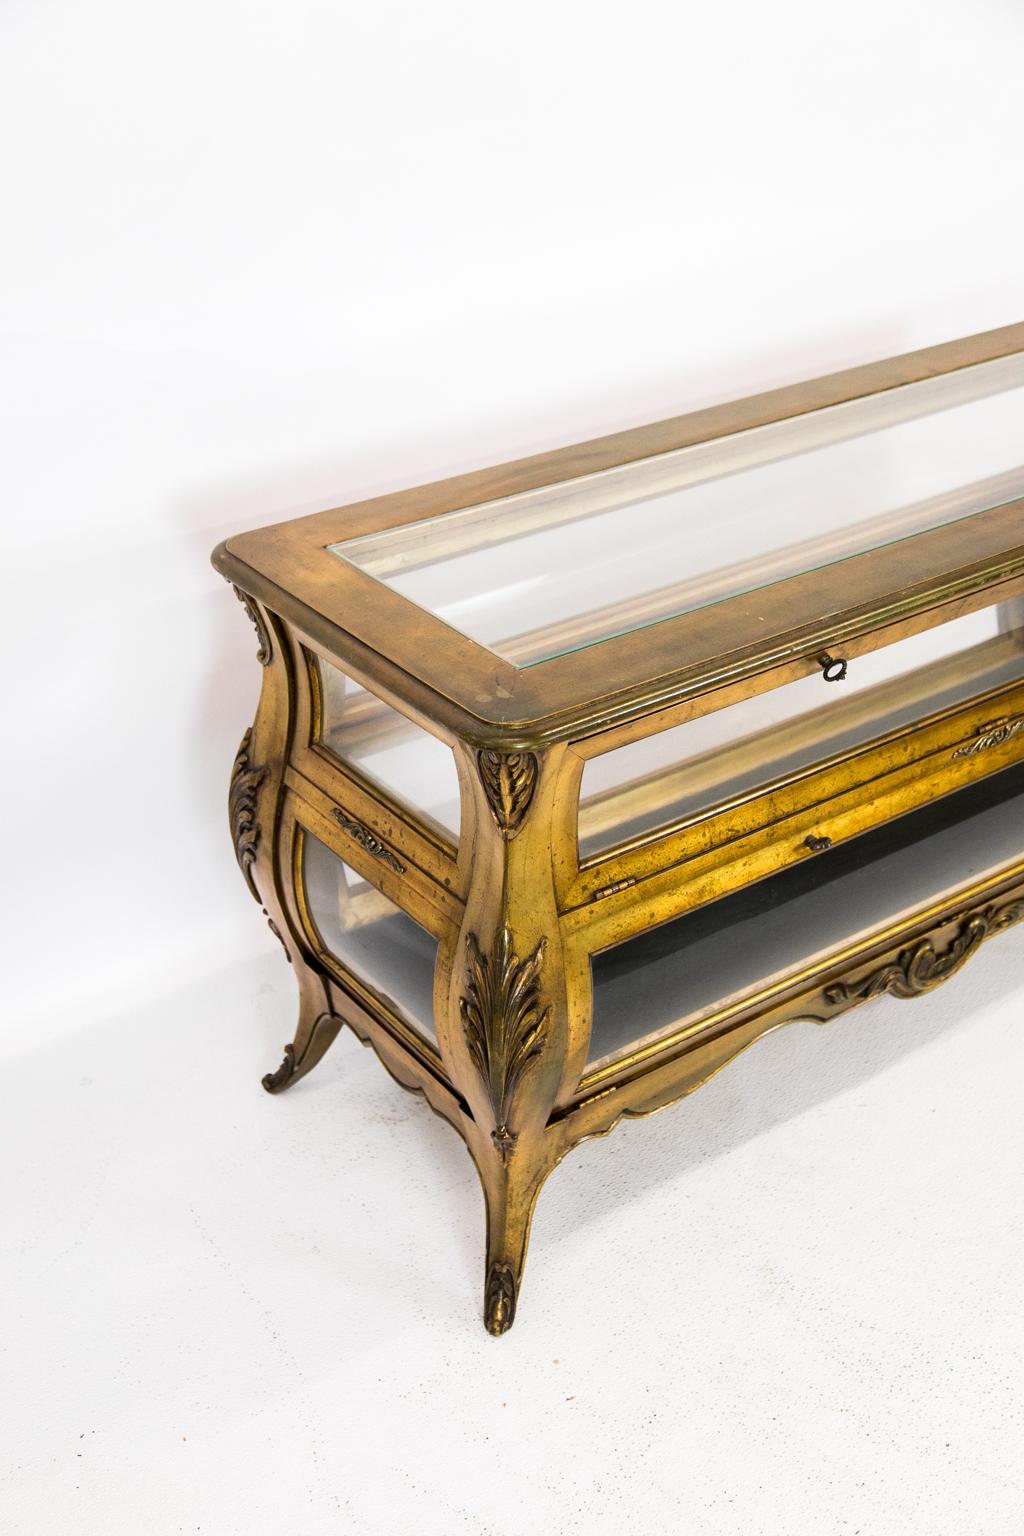 Gold four sided Bombe vitrine, has a double compartment. Long doors fold down to expose an upper glass shelf and black velvet on the lower shelf. The cabriole legs have carved acanthus leaves on all four sides.